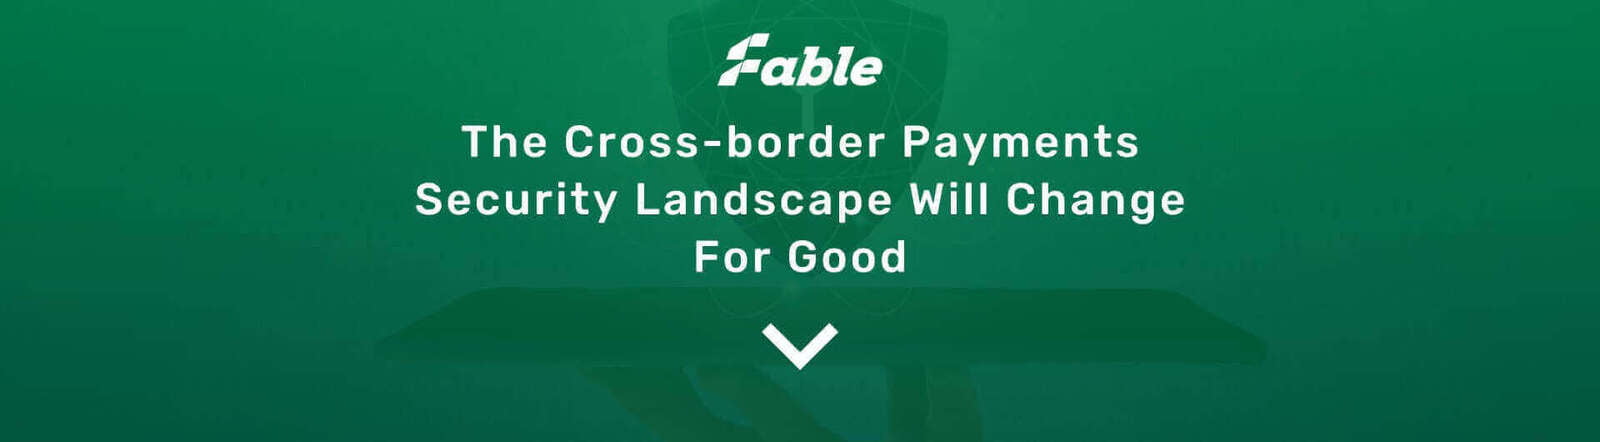 The Cross-border Payments Security Landscape Will Change For Good